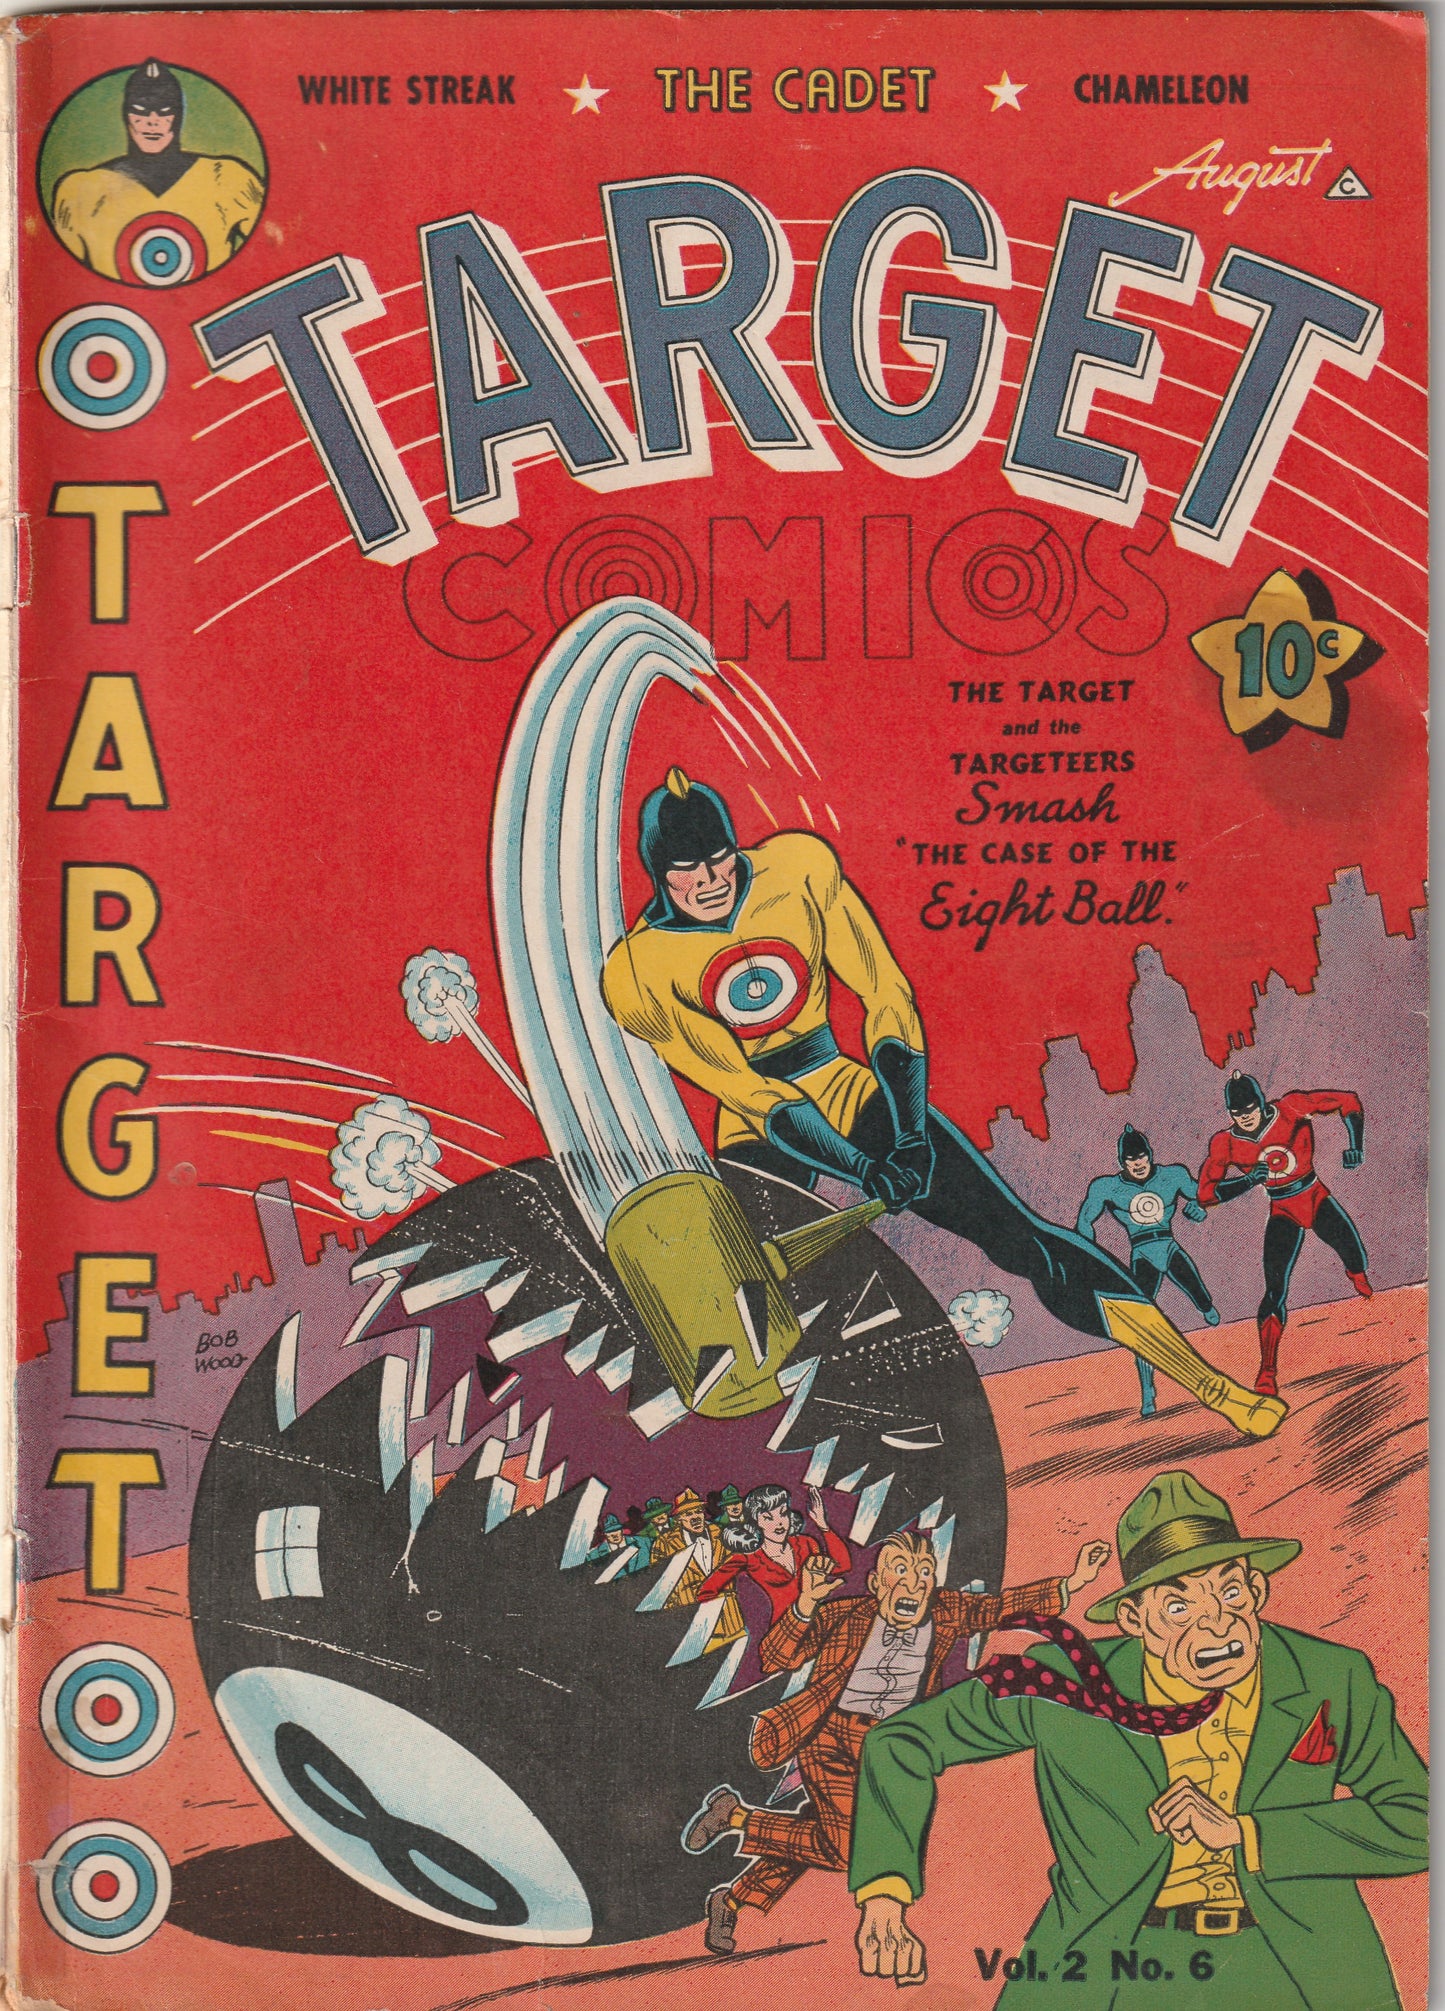 Target Comics Vol 2 #6 (1941) - Red Seal with White Streak